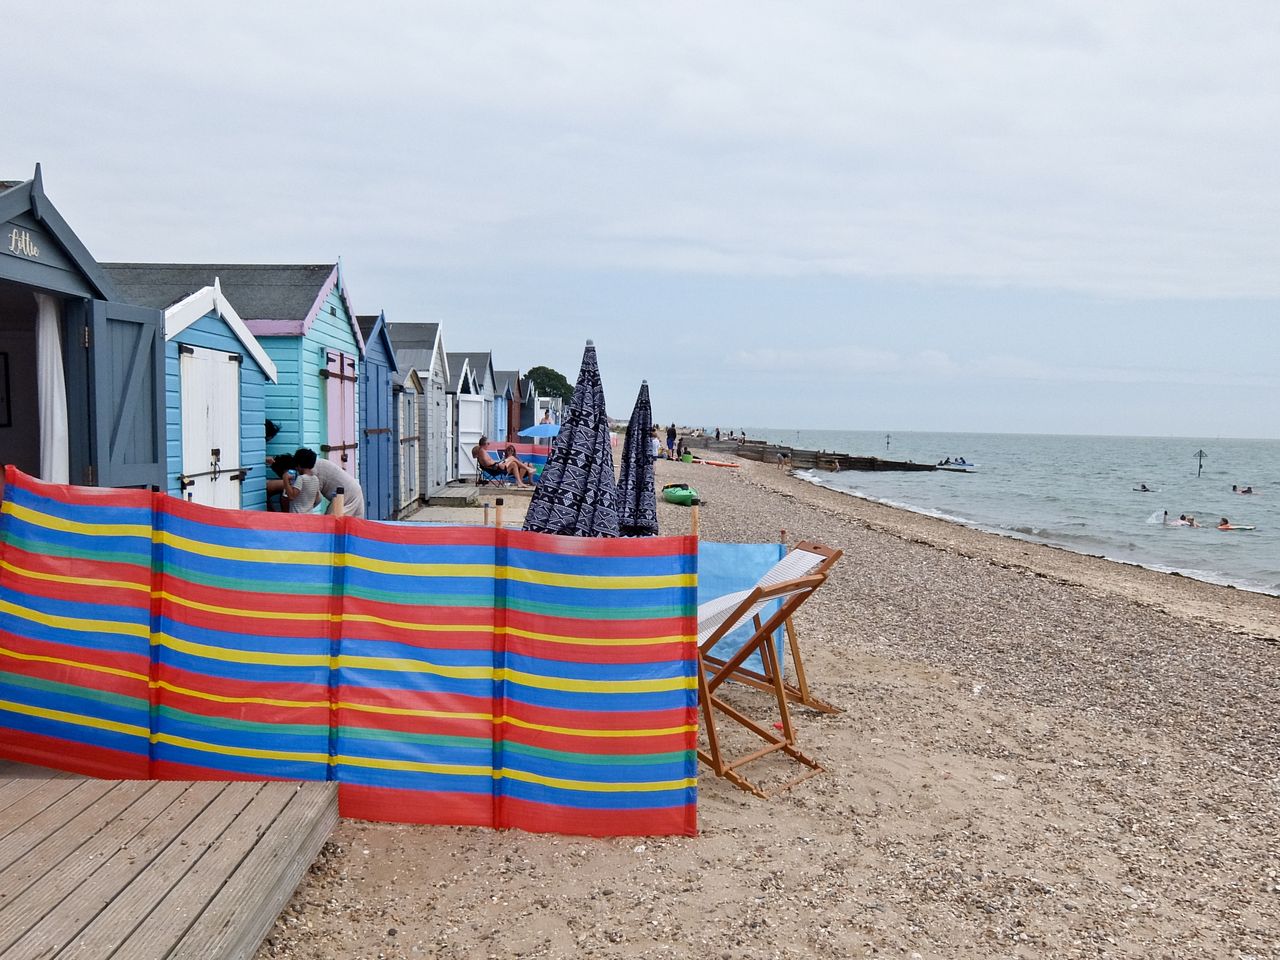 Caravanning in Mersea Island, Essex: An Idyllic Destination for Ultimate Relaxation